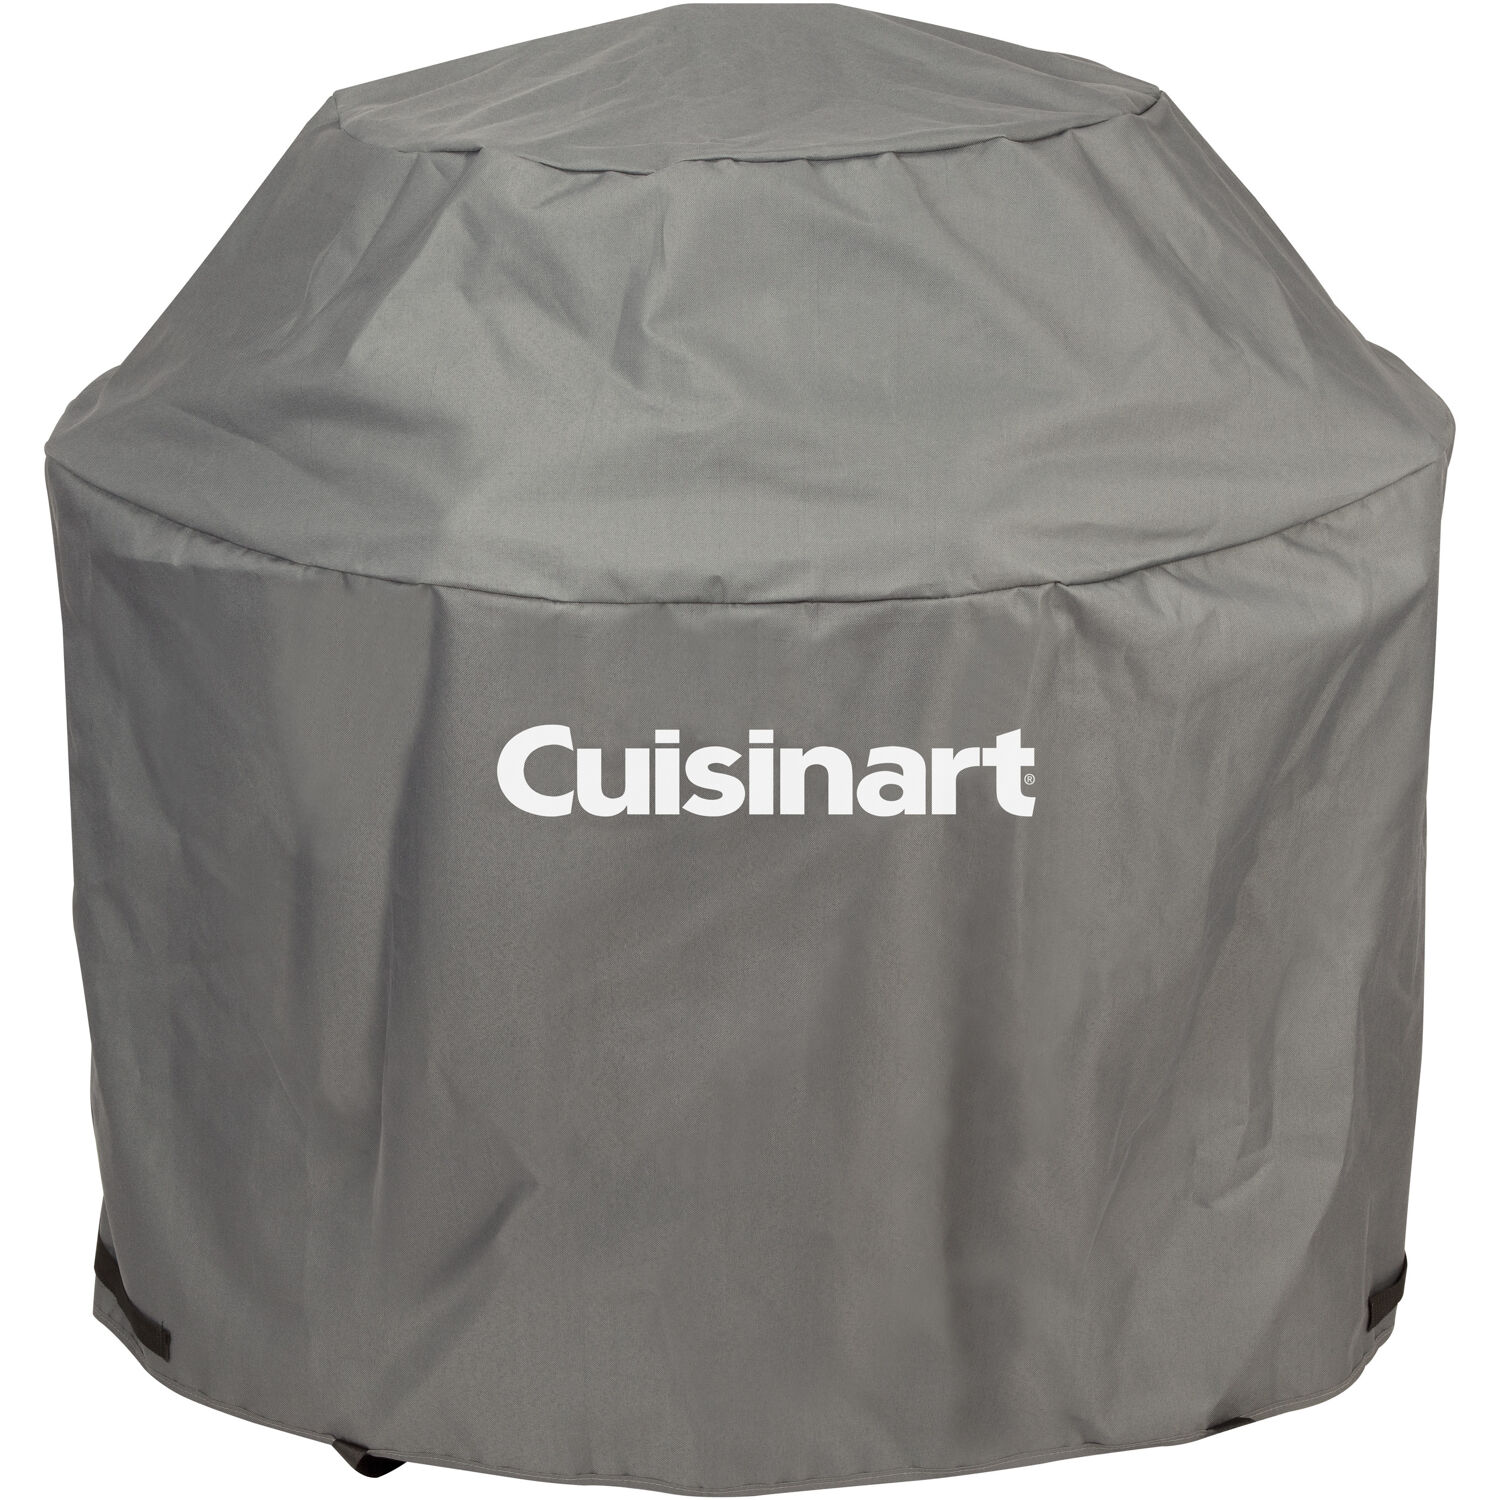 Cuisinart  XL 360° Griddle Cover $10.62 + FS w/ Walmart+ or orders of $35+